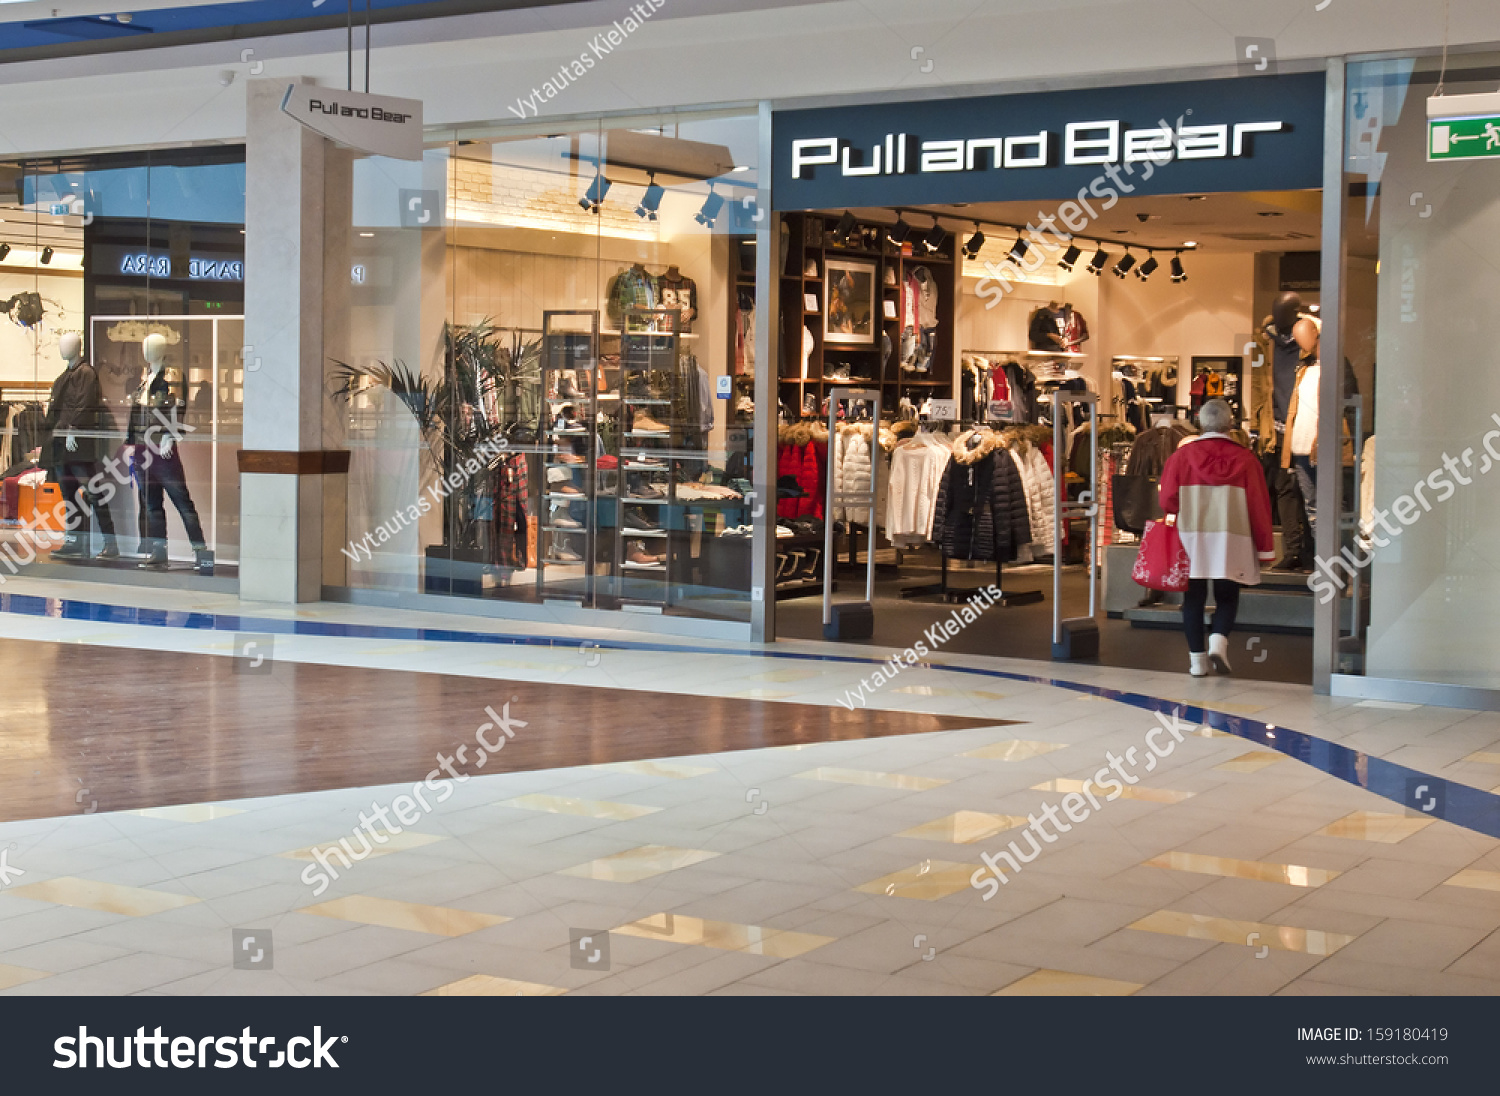 Pull and bear lithuania